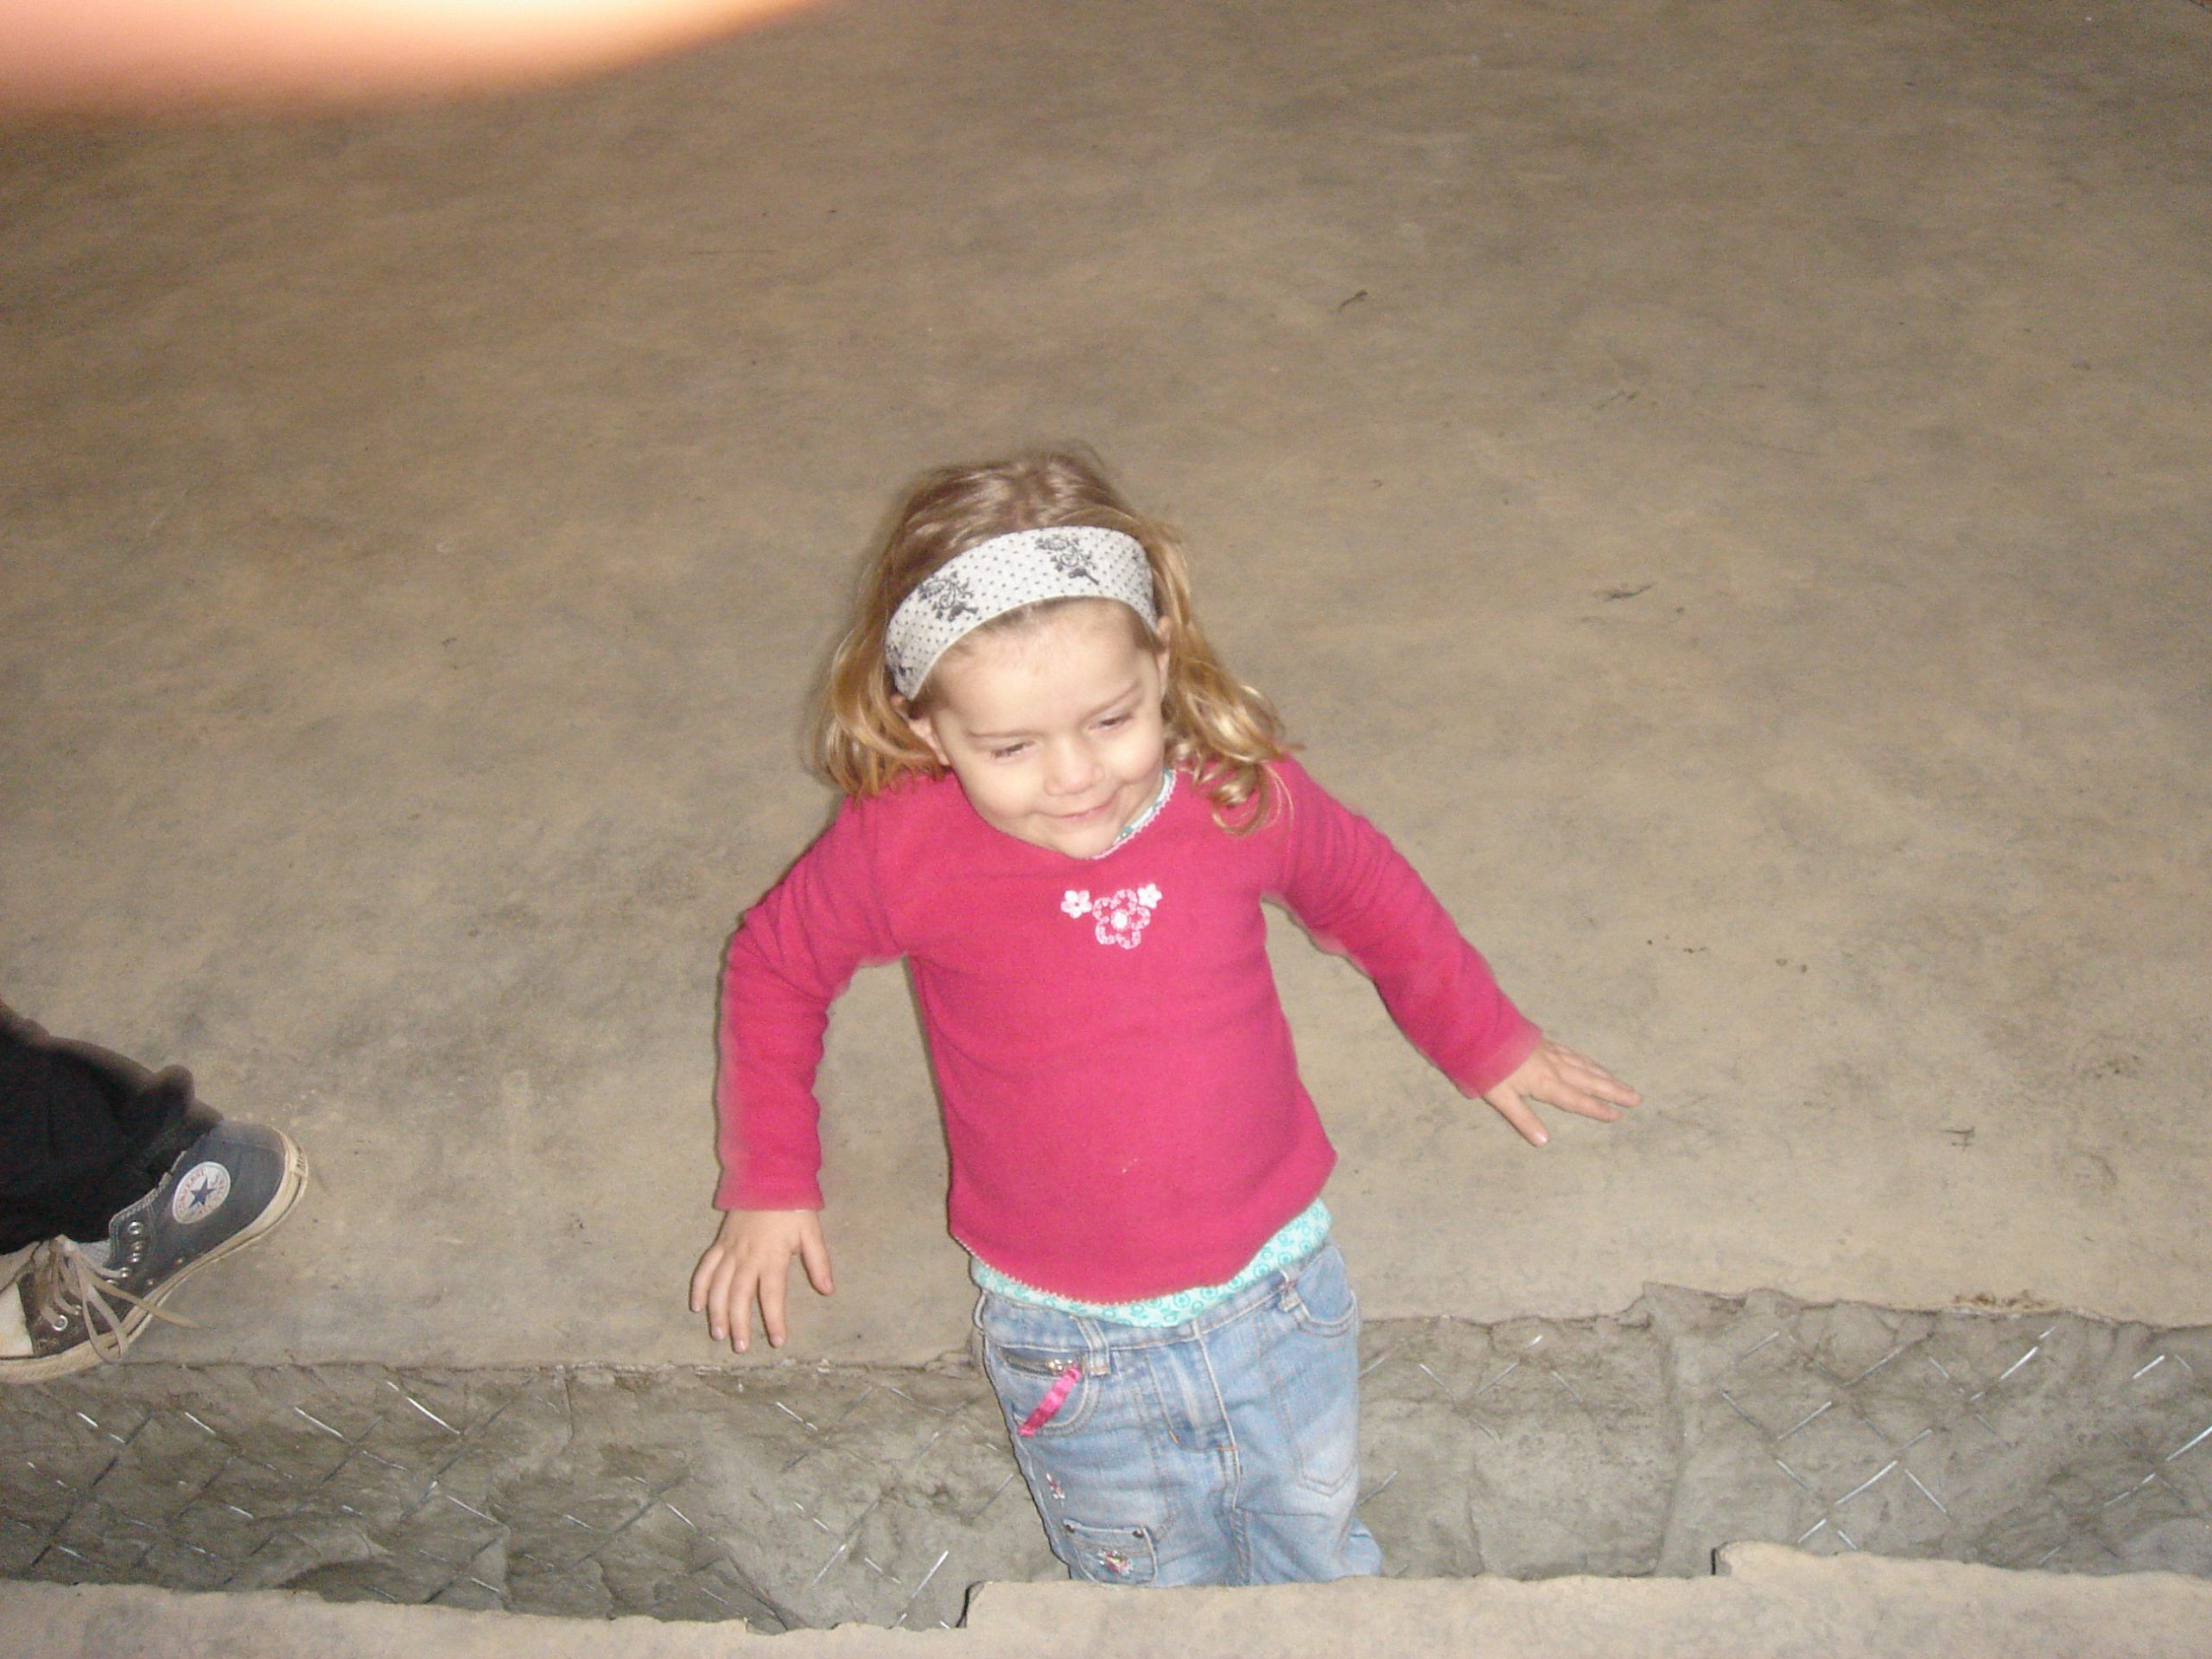 A crack is zigzagging across a concrete floor. A small girl in a pink top is standing in it looking down. It goes up to her knees.